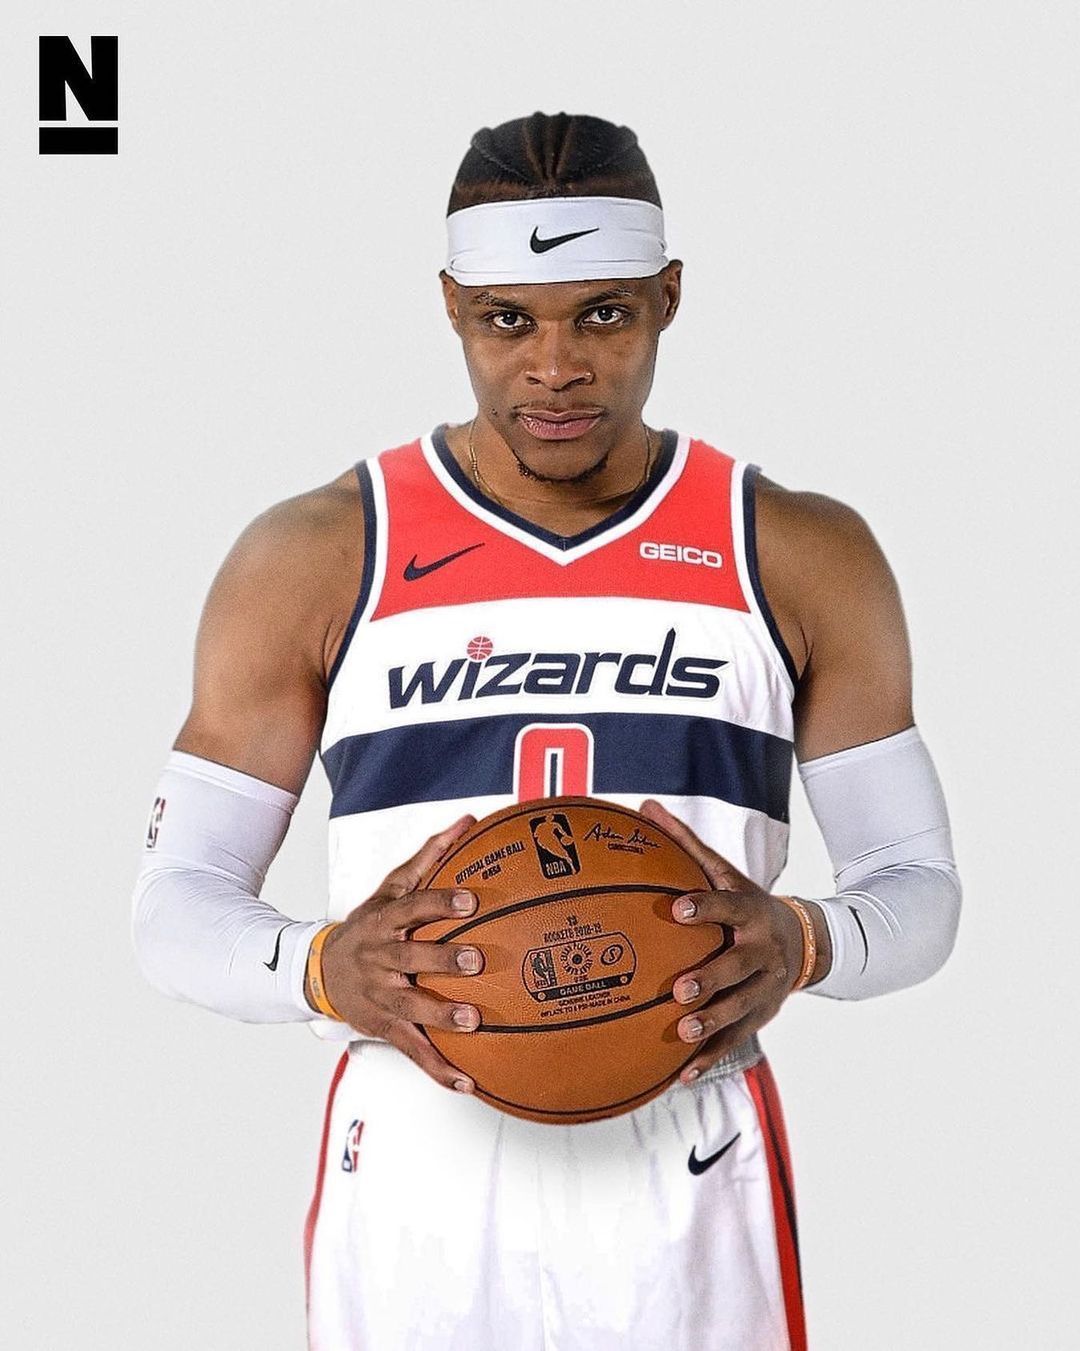 Basketball Forever on Instagram: “Russell Westbrook is about to revert to BEASTBROOK again for the Washington Wi. Washington wizards, Westbrook, Russell westbrook